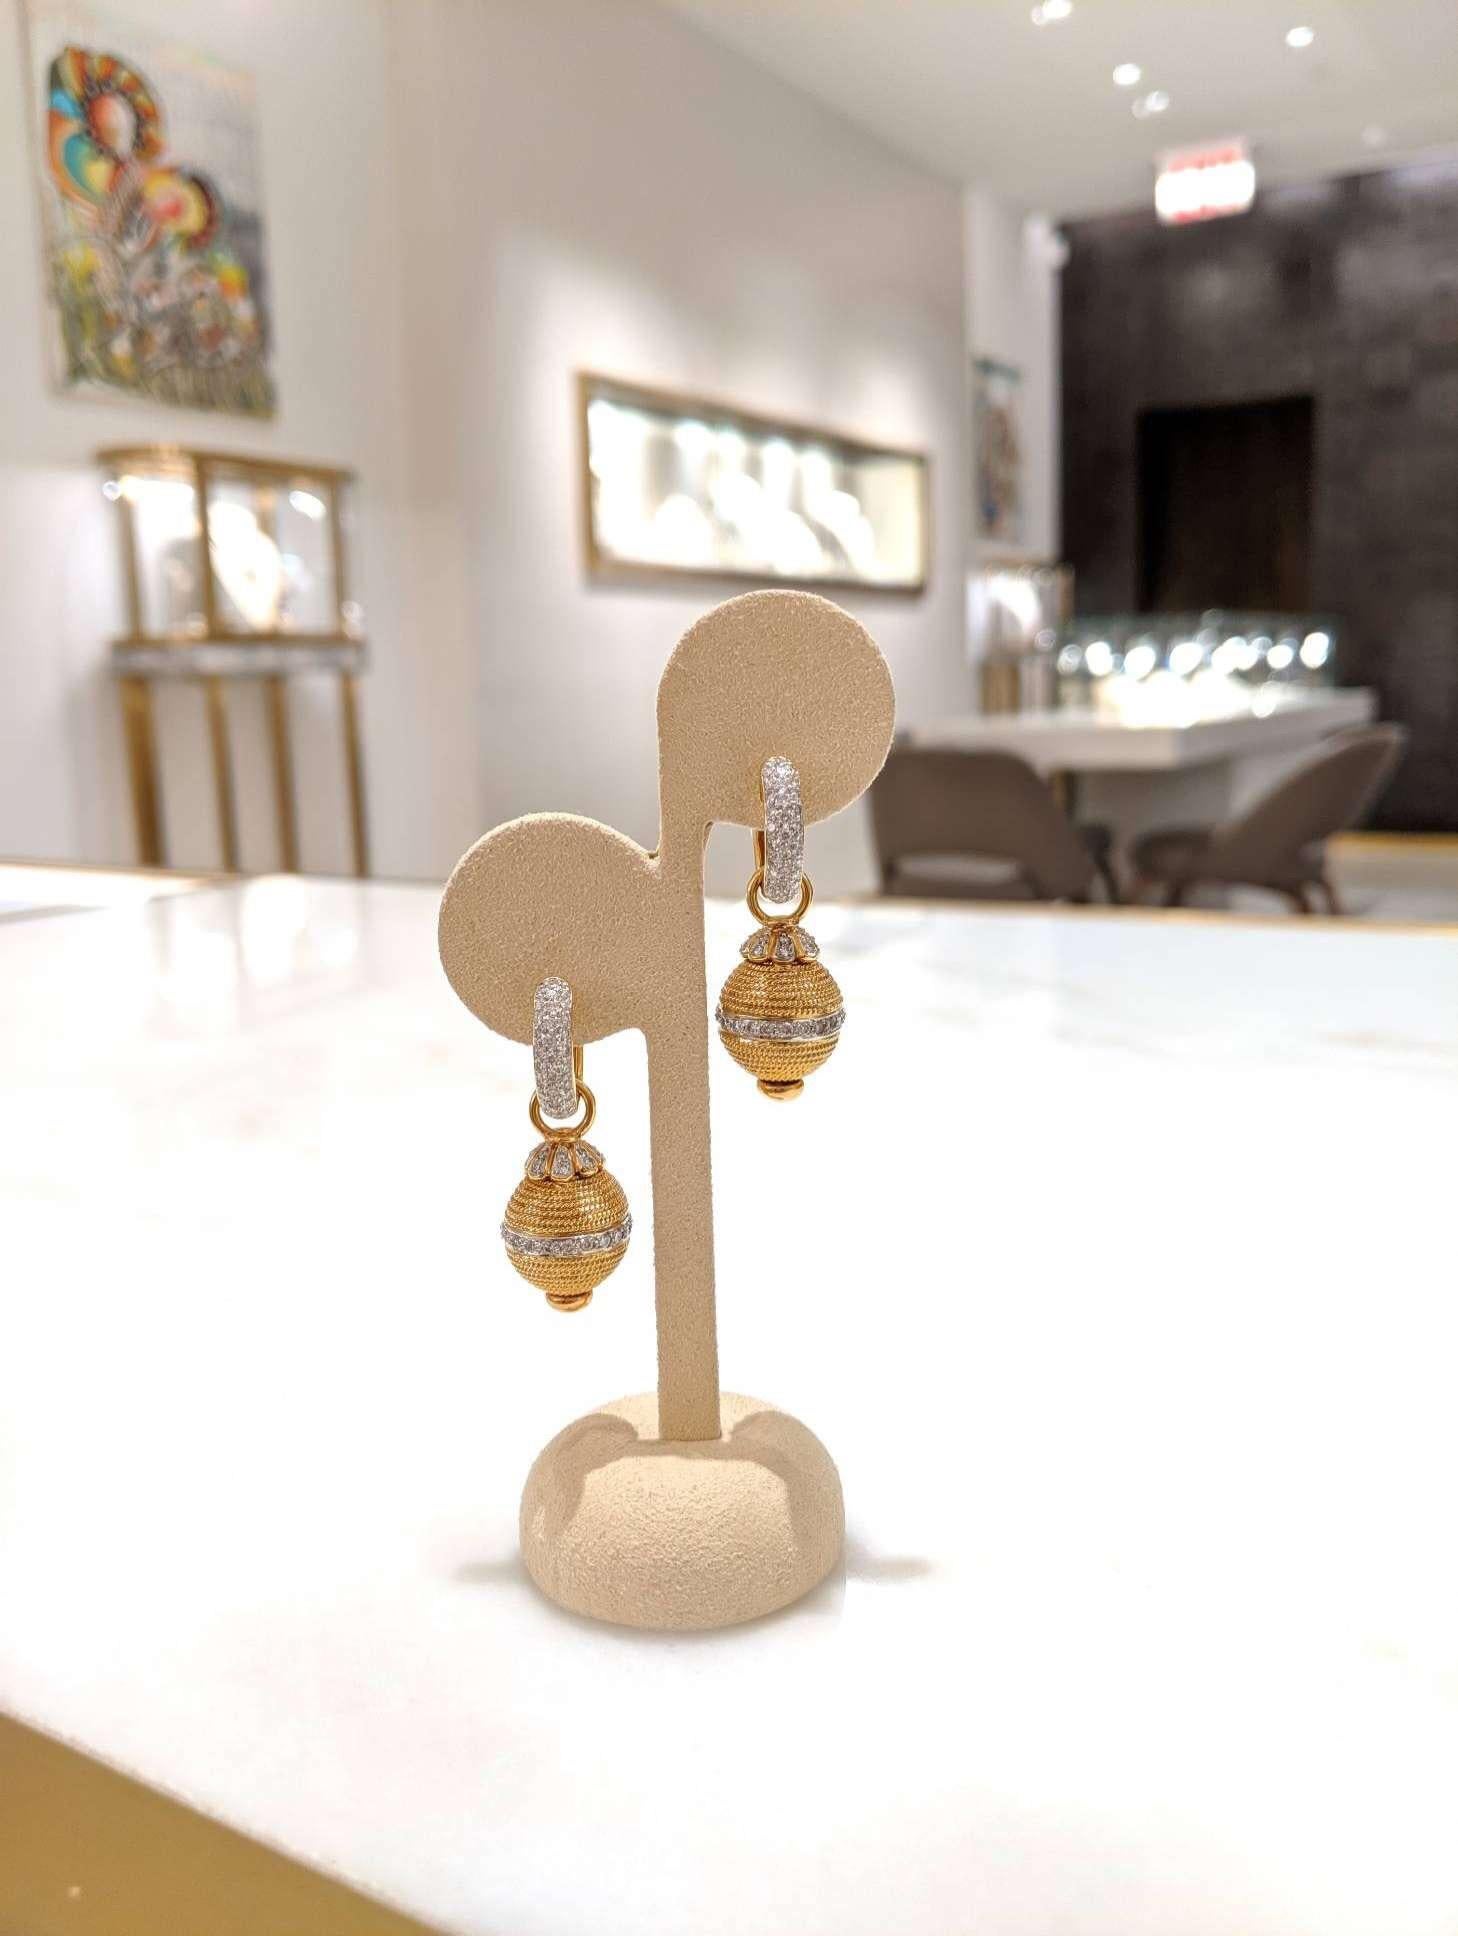 These versatile 18 kt yellow gold earrings can be worn alone as a simple pave diamond huggie or for a more dramatic statement with the beautifully crafted gold and diamond drop.
The total diamond weight is 2.10 carats of F-G color white diamonds.